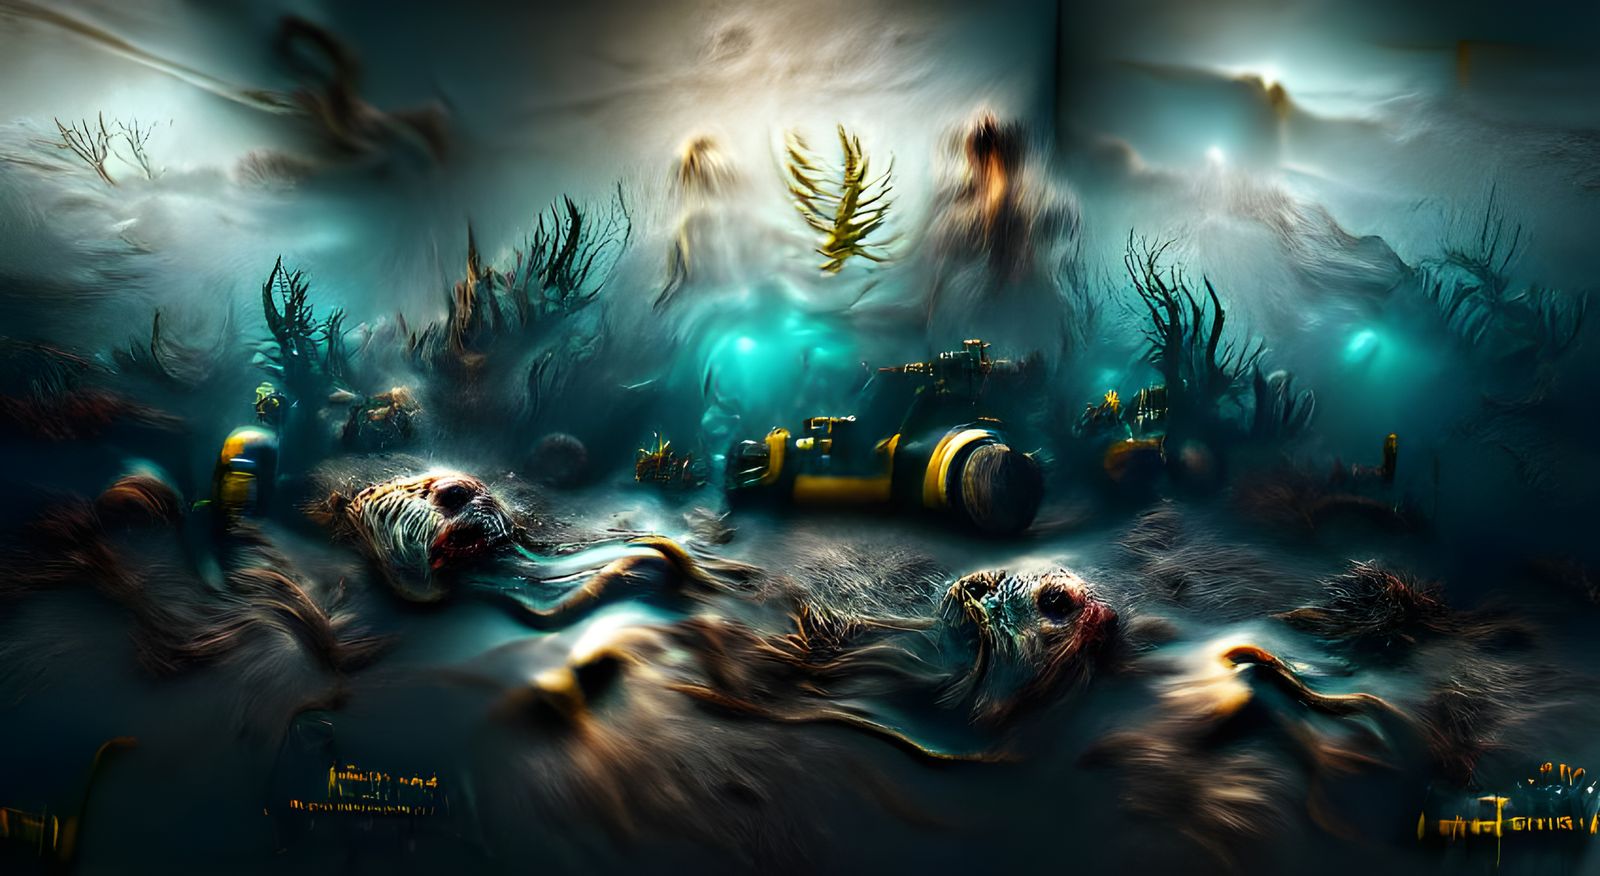 scary water wallpaper